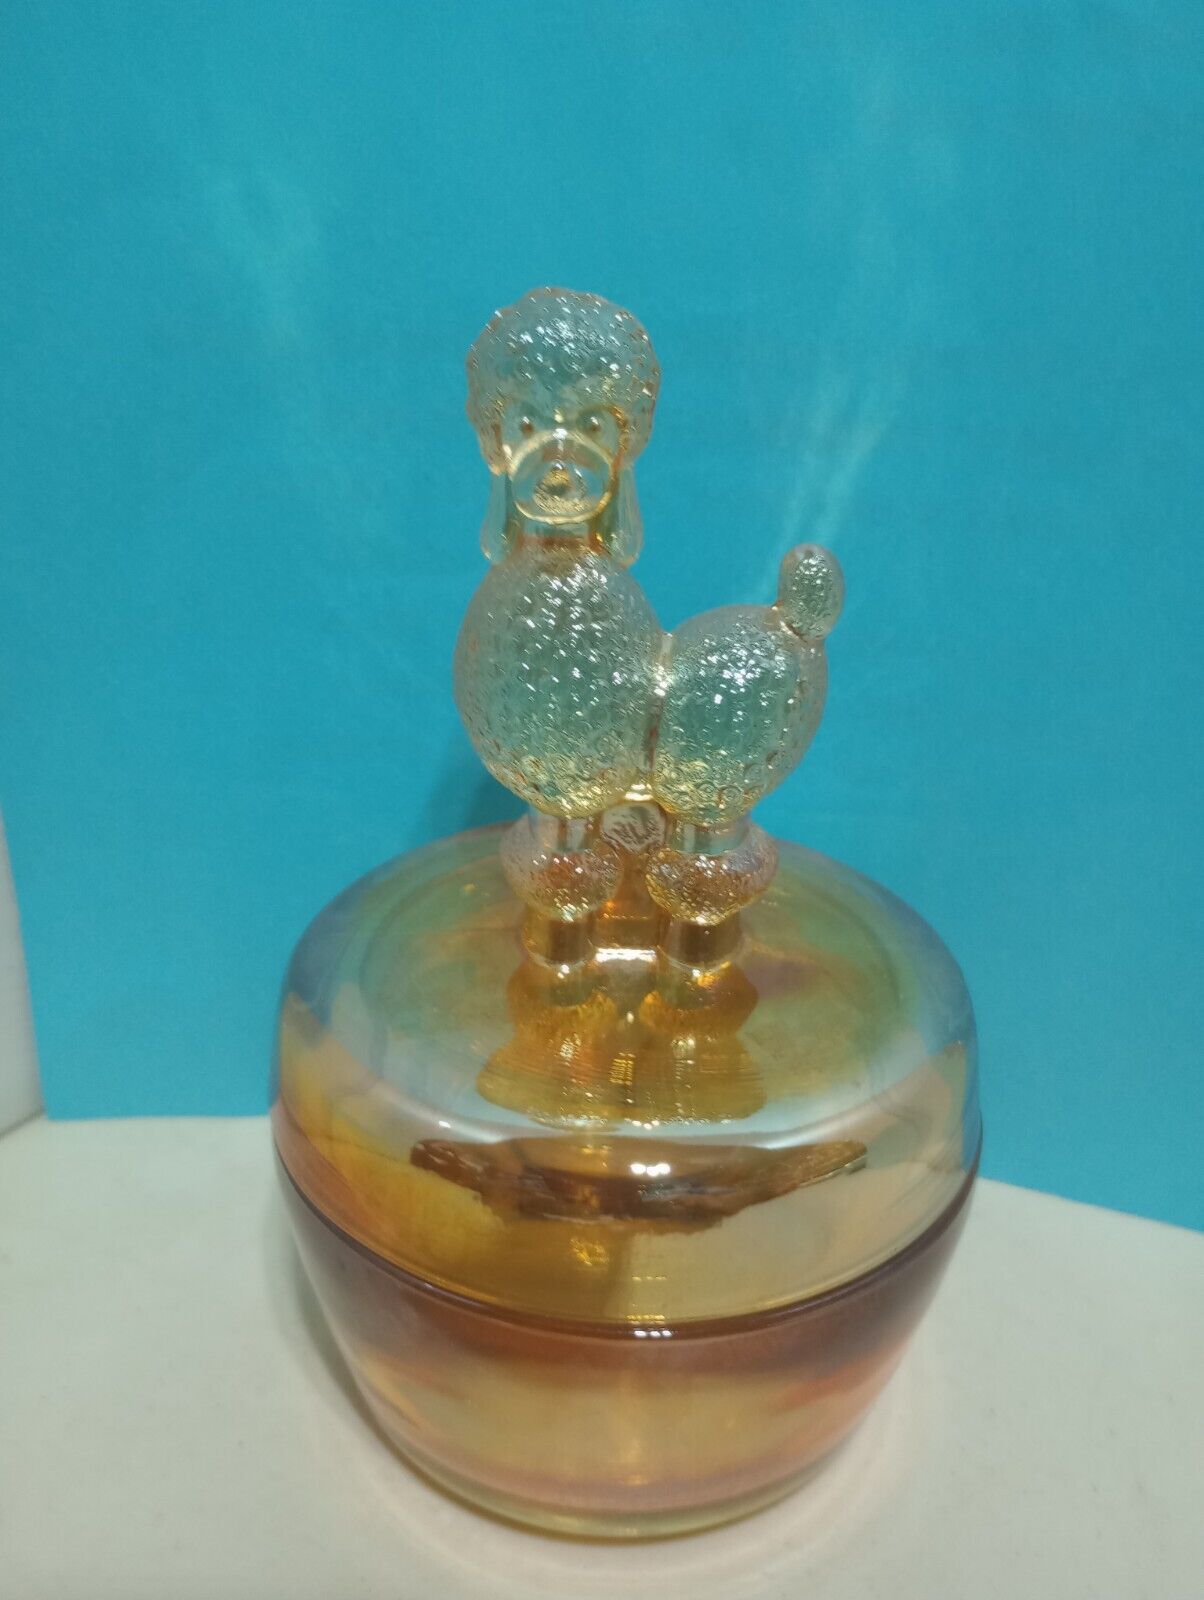 Vintage Jeannette Marigold Carnival Glass Candy Dish With Poodle on Top